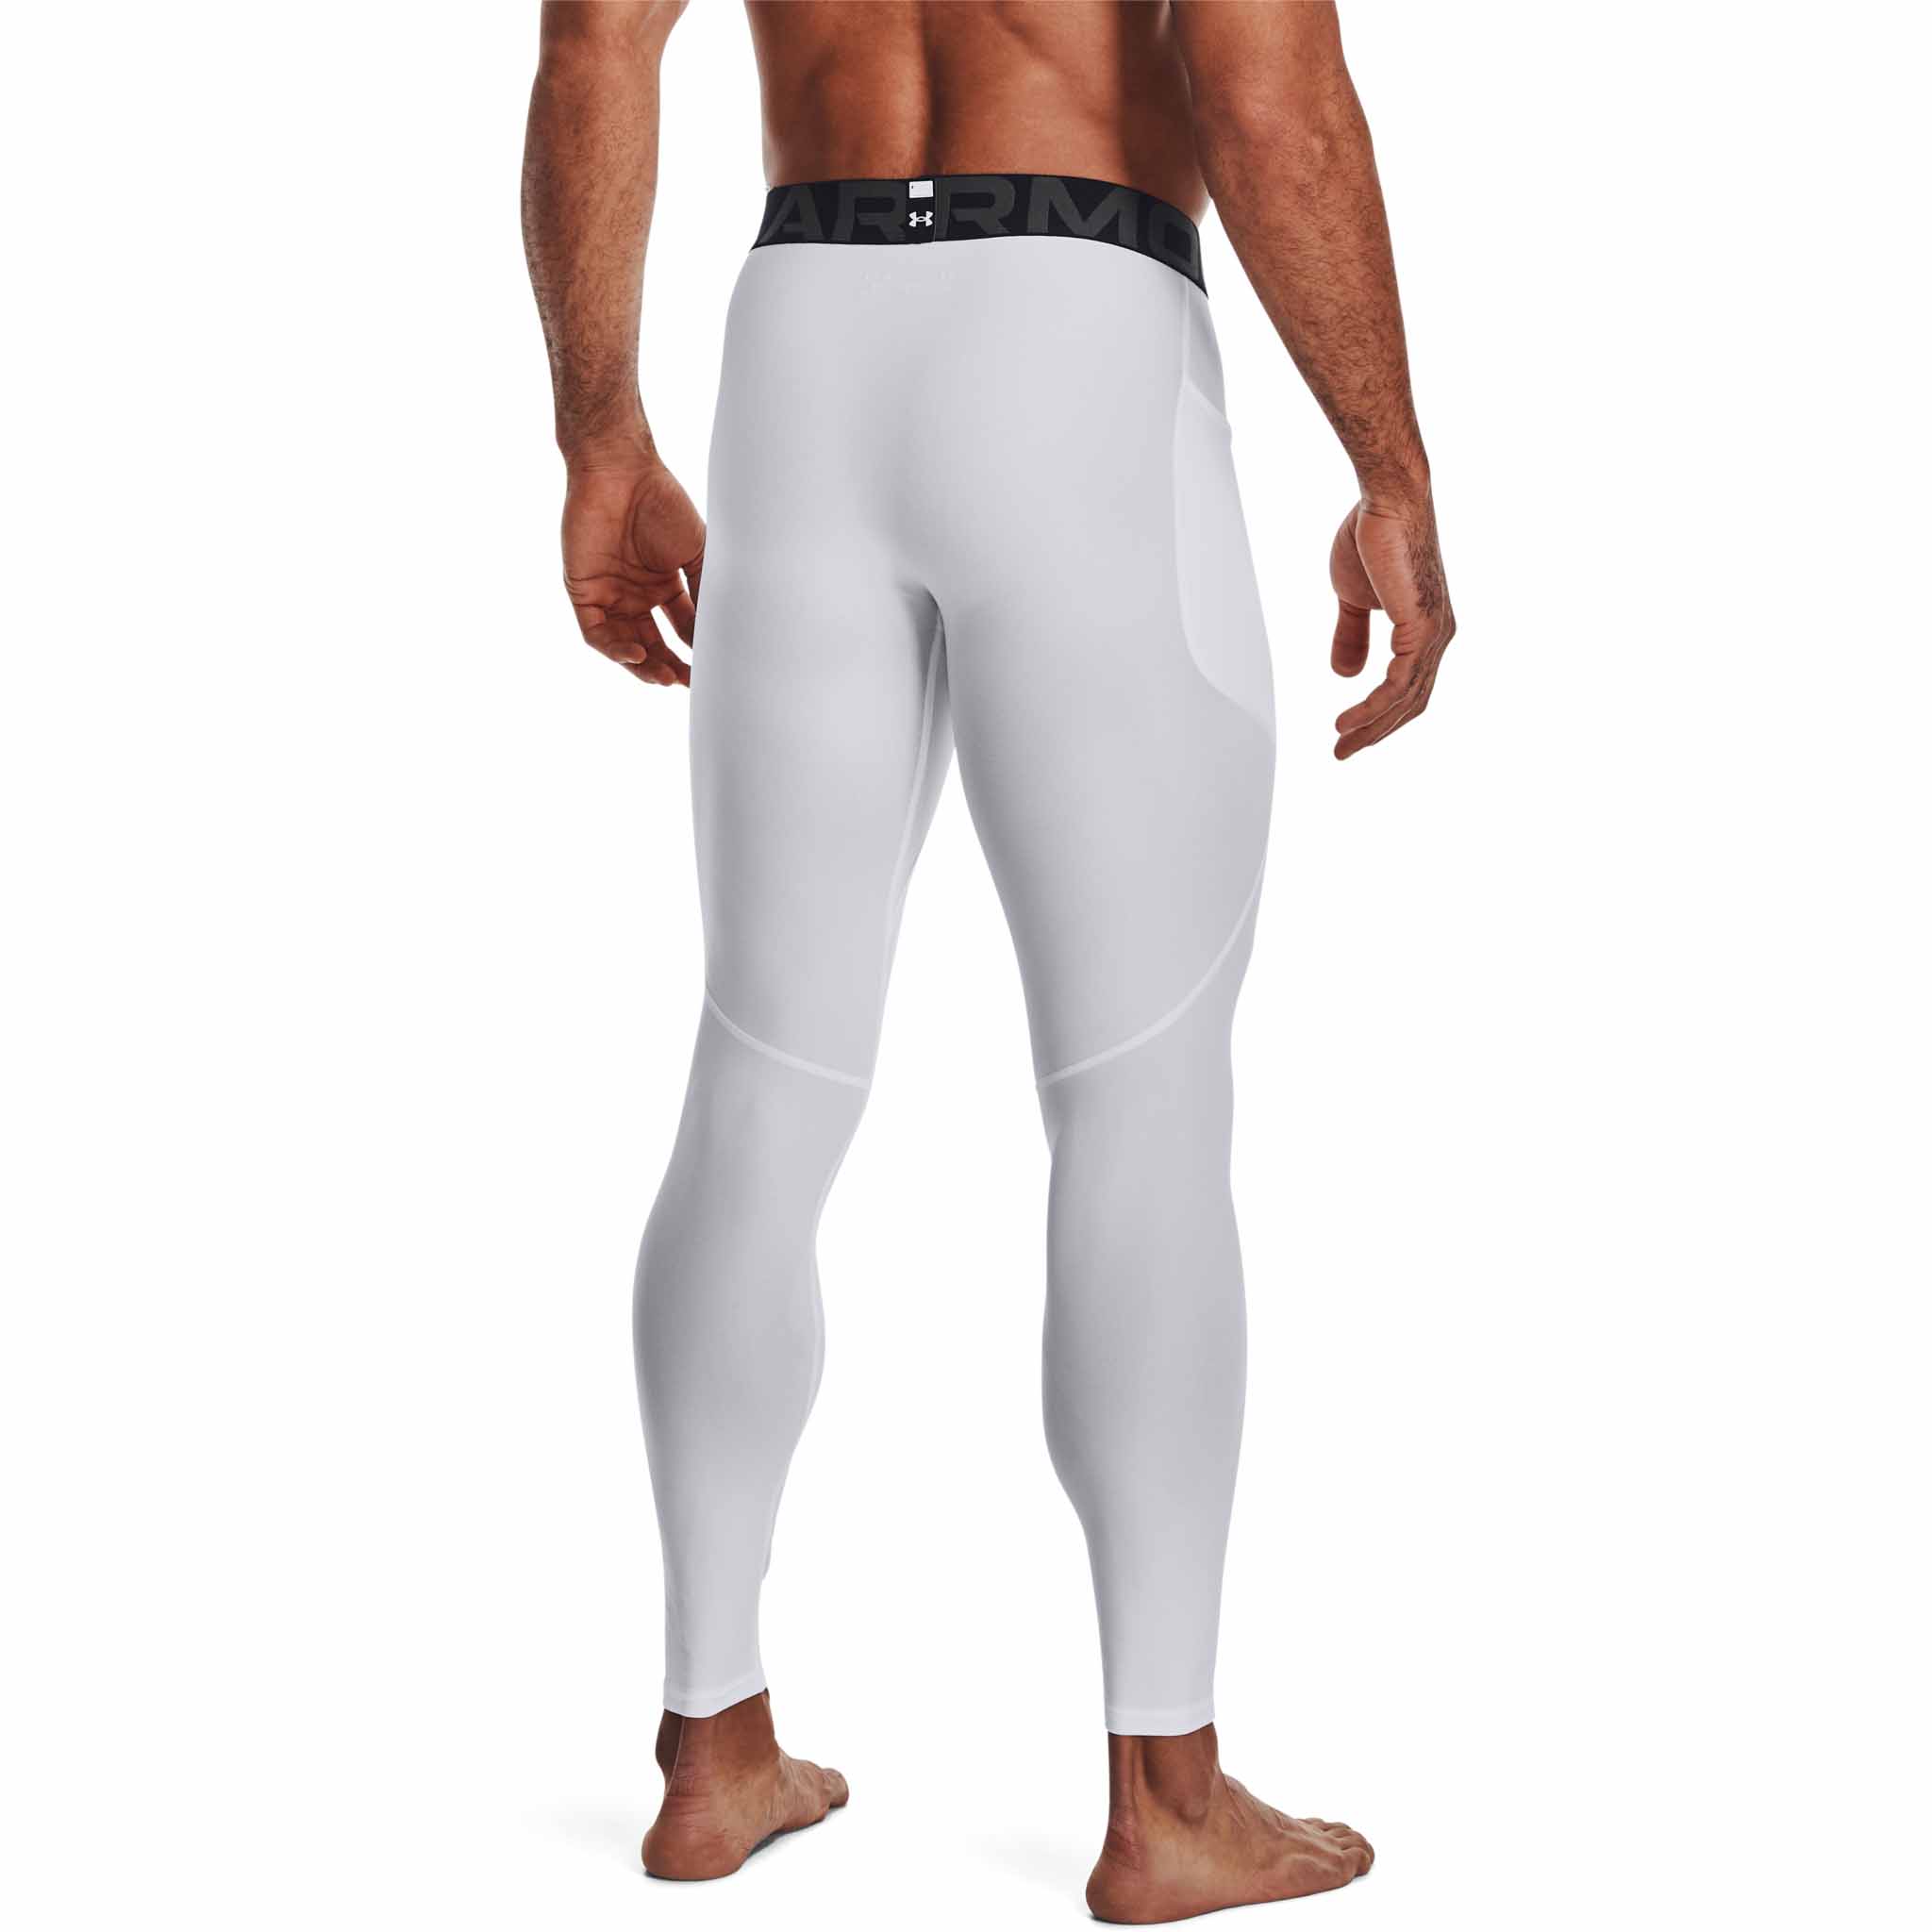 Buy Under Armour Men's Armour HeatGear Leggings , Black (001)/Pitch Gray ,  Large at